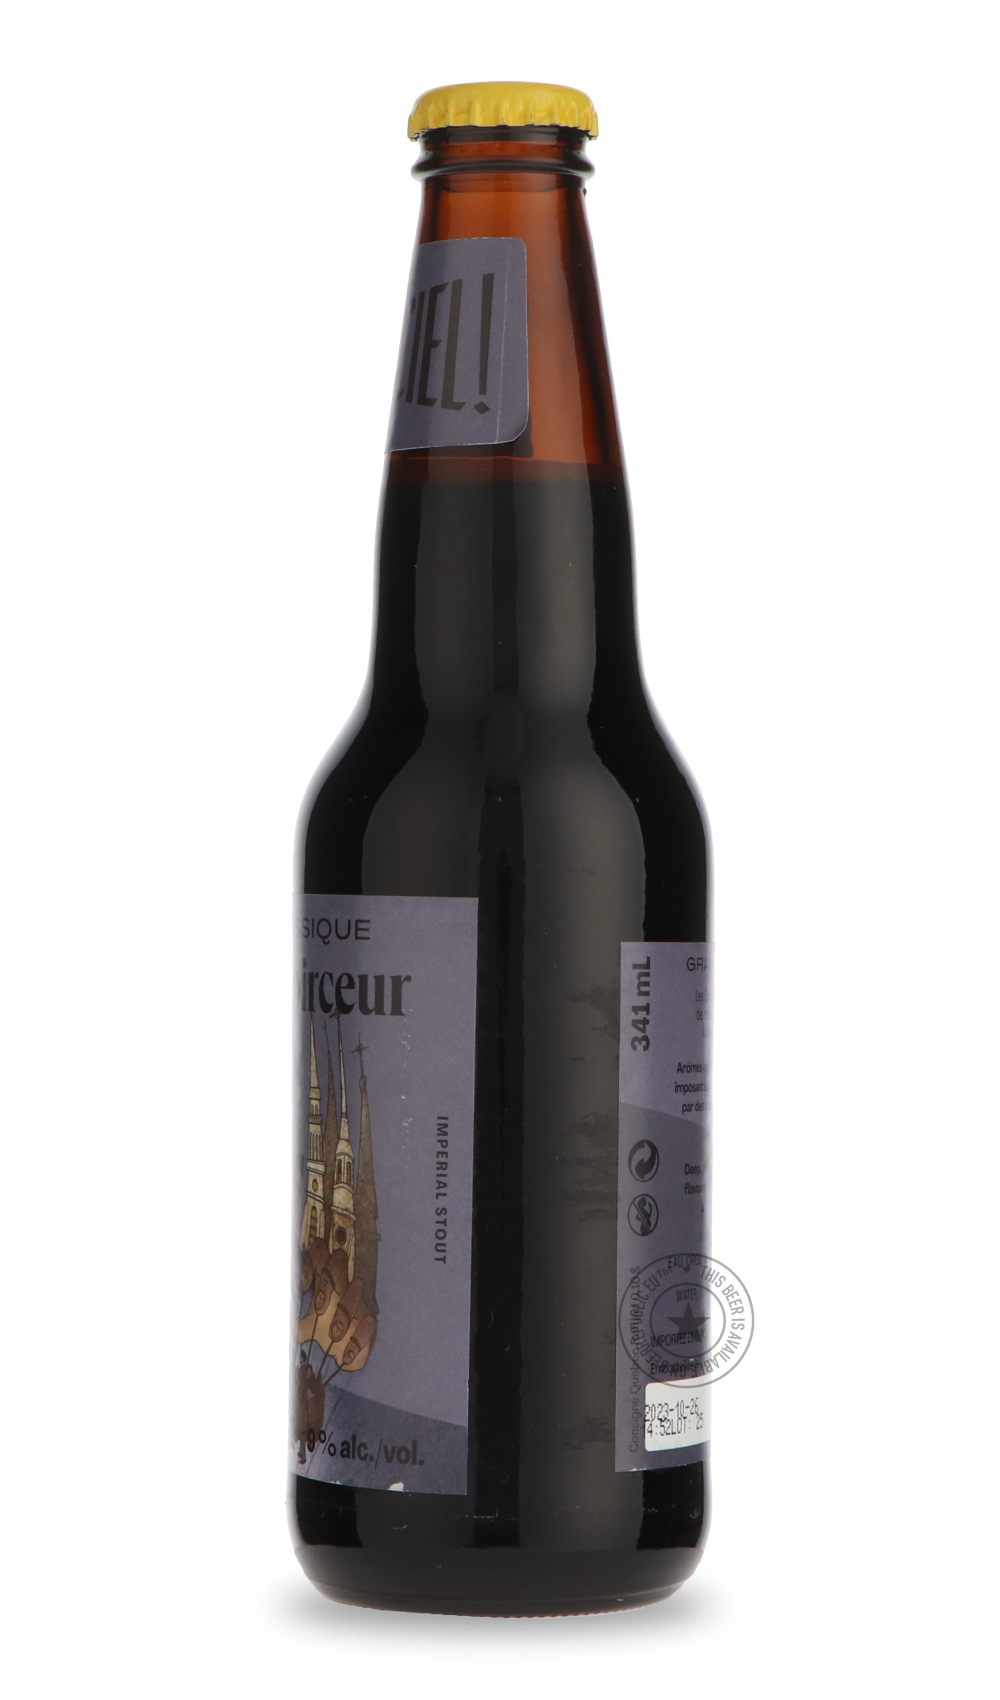 -Dieu du Ciel- Grande Noirceur-Stout & Porter- Only @ Beer Republic - The best online beer store for American & Canadian craft beer - Buy beer online from the USA and Canada - Bier online kopen - Amerikaans bier kopen - Craft beer store - Craft beer kopen - Amerikanisch bier kaufen - Bier online kaufen - Acheter biere online - IPA - Stout - Porter - New England IPA - Hazy IPA - Imperial Stout - Barrel Aged - Barrel Aged Imperial Stout - Brown - Dark beer - Blond - Blonde - Pilsner - Lager - Wheat - Weizen -